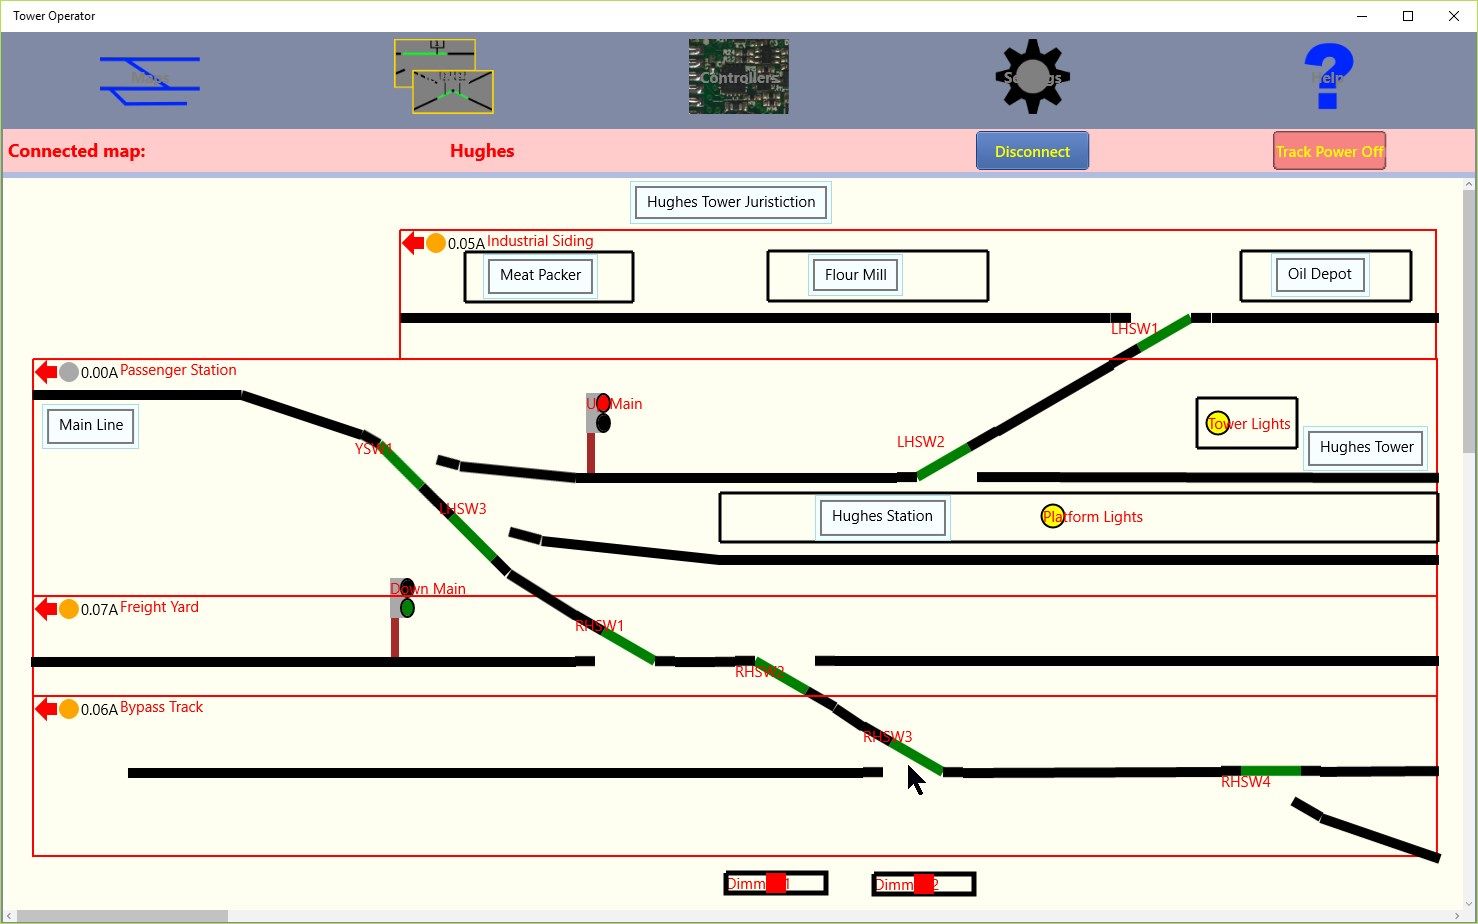 Control your model railroad from a schematic control panel - a map of part of your layout.Use a tablet or PC, tap or click on a switch, light or signal symbol to change it.
Turn power on/off or change direction for a district.
Monitor current or overload.